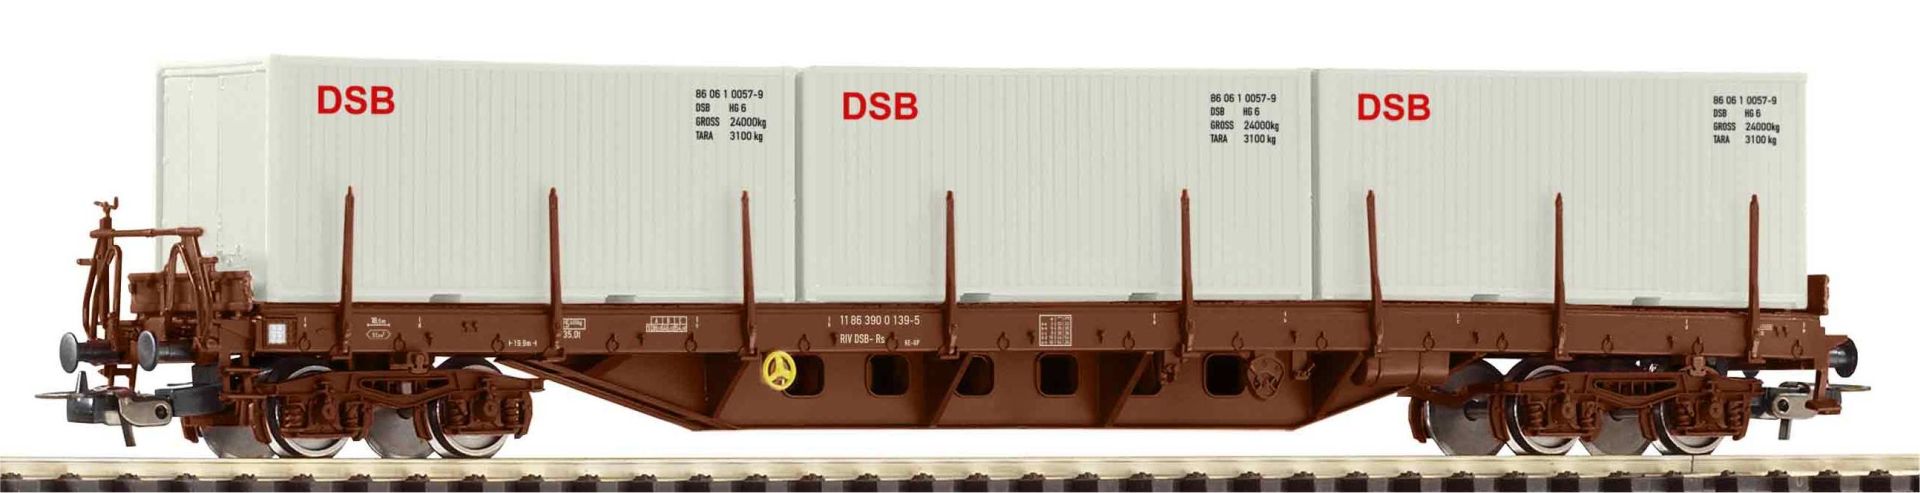 Piko 24527 - Containertragwagen Rs mit 3 Containern, DSB, Ep.IV